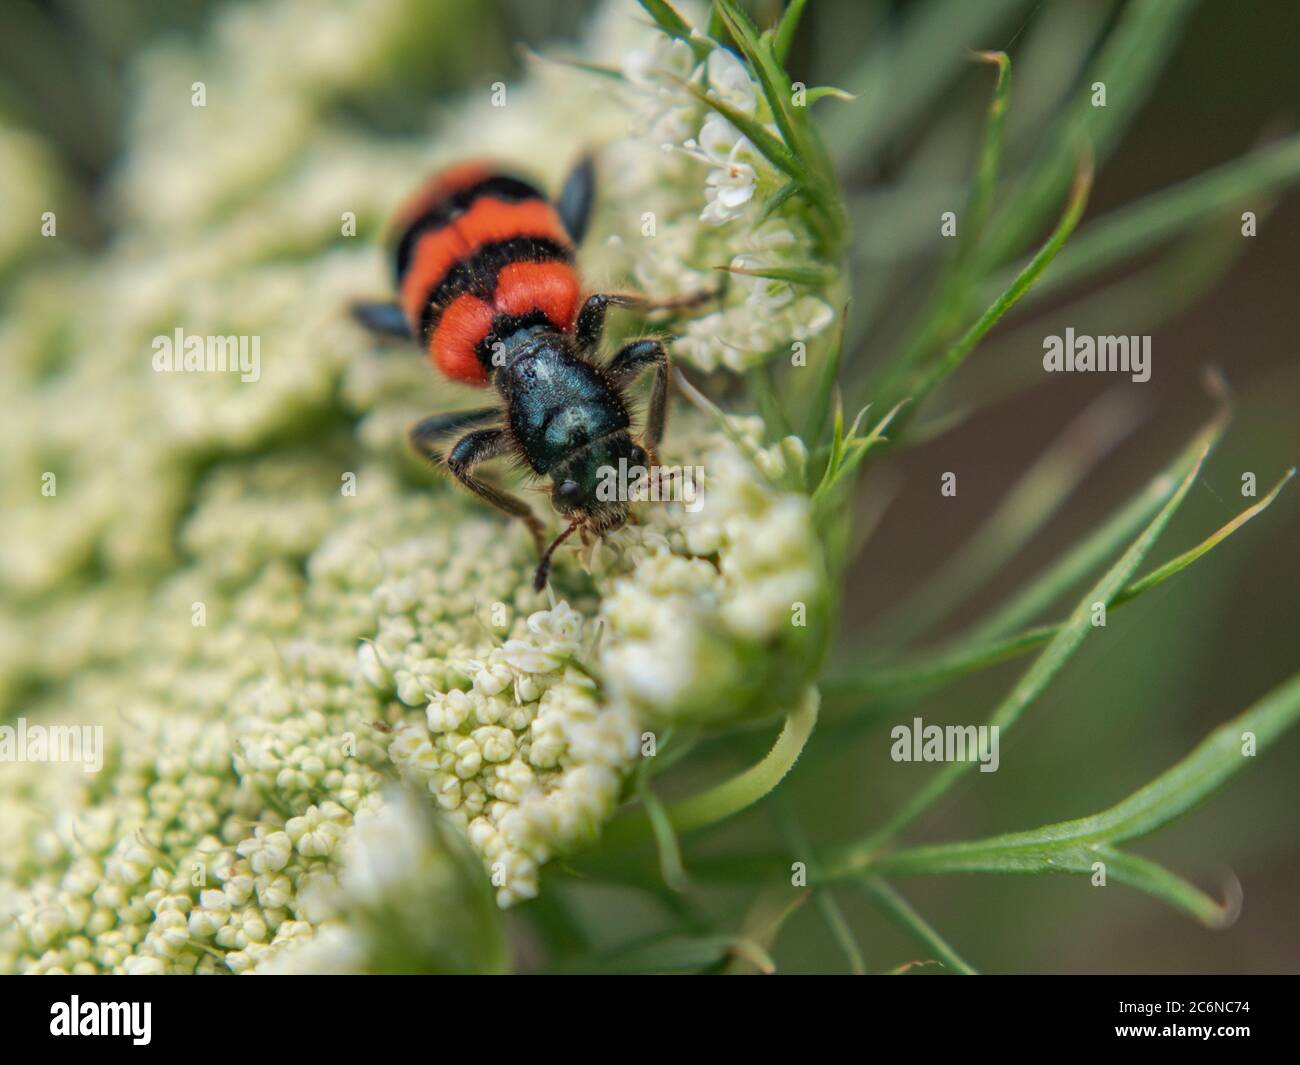 Red-black Mylabris variabilis, striped blister beetle on carrot flower, close up Stock Photo